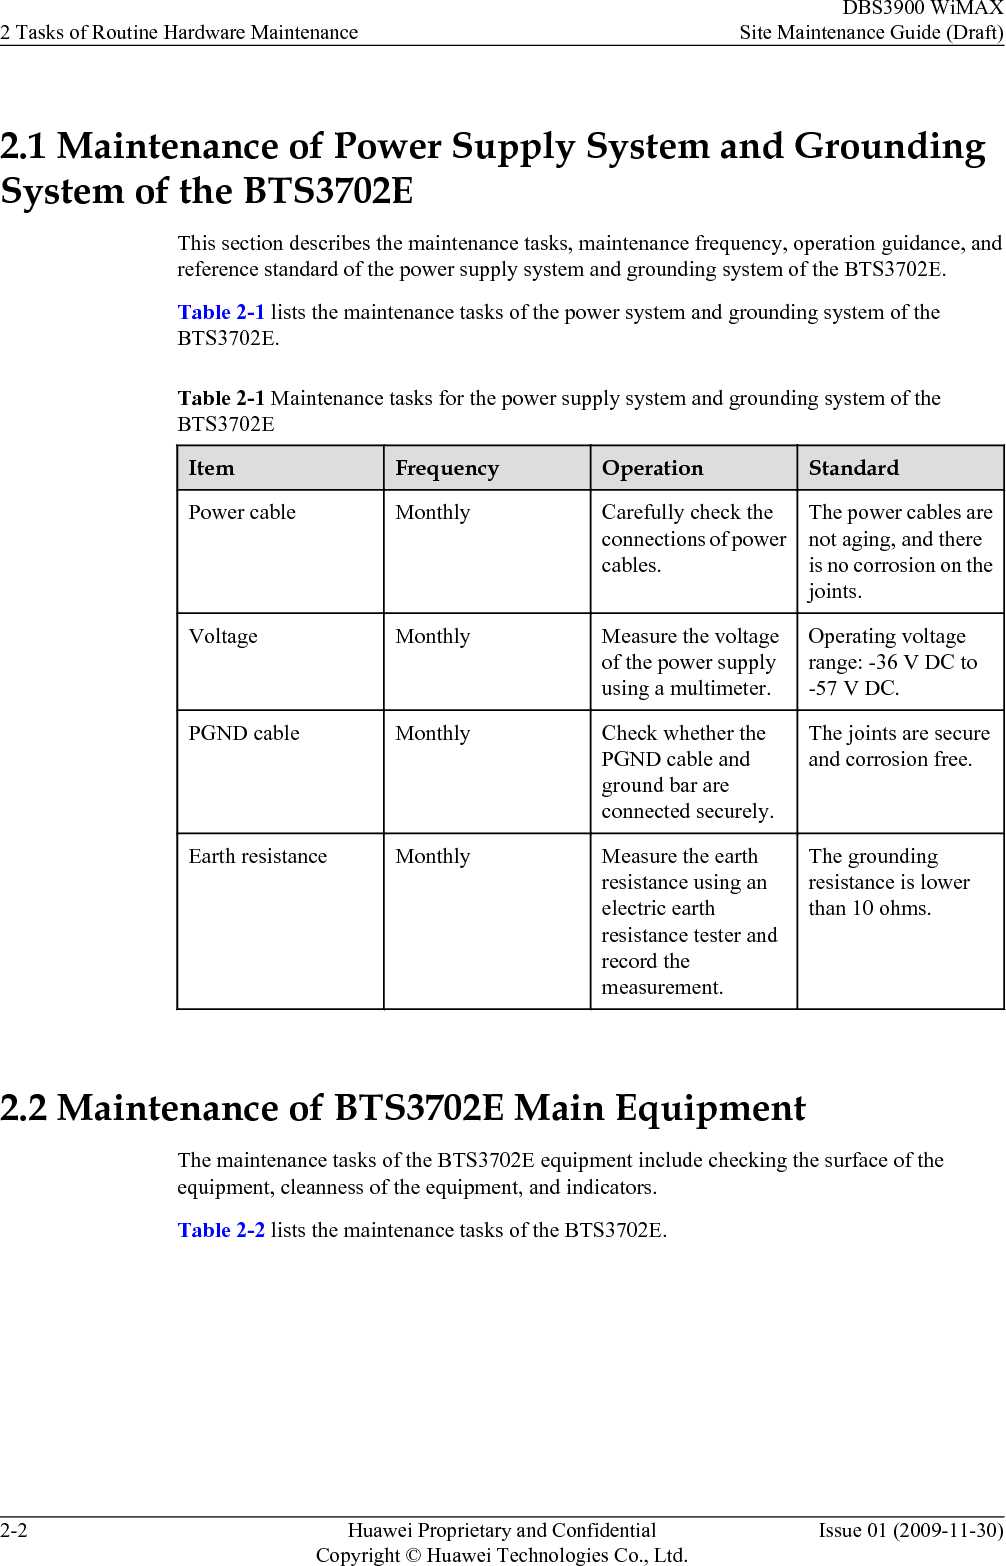 2.1 Maintenance of Power Supply System and GroundingSystem of the BTS3702EThis section describes the maintenance tasks, maintenance frequency, operation guidance, andreference standard of the power supply system and grounding system of the BTS3702E.Table 2-1 lists the maintenance tasks of the power system and grounding system of theBTS3702E.Table 2-1 Maintenance tasks for the power supply system and grounding system of theBTS3702EItem Frequency Operation StandardPower cable Monthly Carefully check theconnections of powercables.The power cables arenot aging, and thereis no corrosion on thejoints.Voltage Monthly Measure the voltageof the power supplyusing a multimeter.Operating voltagerange: -36 V DC to-57 V DC.PGND cable Monthly Check whether thePGND cable andground bar areconnected securely.The joints are secureand corrosion free.Earth resistance Monthly Measure the earthresistance using anelectric earthresistance tester andrecord themeasurement.The groundingresistance is lowerthan 10 ohms. 2.2 Maintenance of BTS3702E Main EquipmentThe maintenance tasks of the BTS3702E equipment include checking the surface of theequipment, cleanness of the equipment, and indicators.Table 2-2 lists the maintenance tasks of the BTS3702E.2 Tasks of Routine Hardware MaintenanceDBS3900 WiMAXSite Maintenance Guide (Draft)2-2 Huawei Proprietary and ConfidentialCopyright © Huawei Technologies Co., Ltd.Issue 01 (2009-11-30)